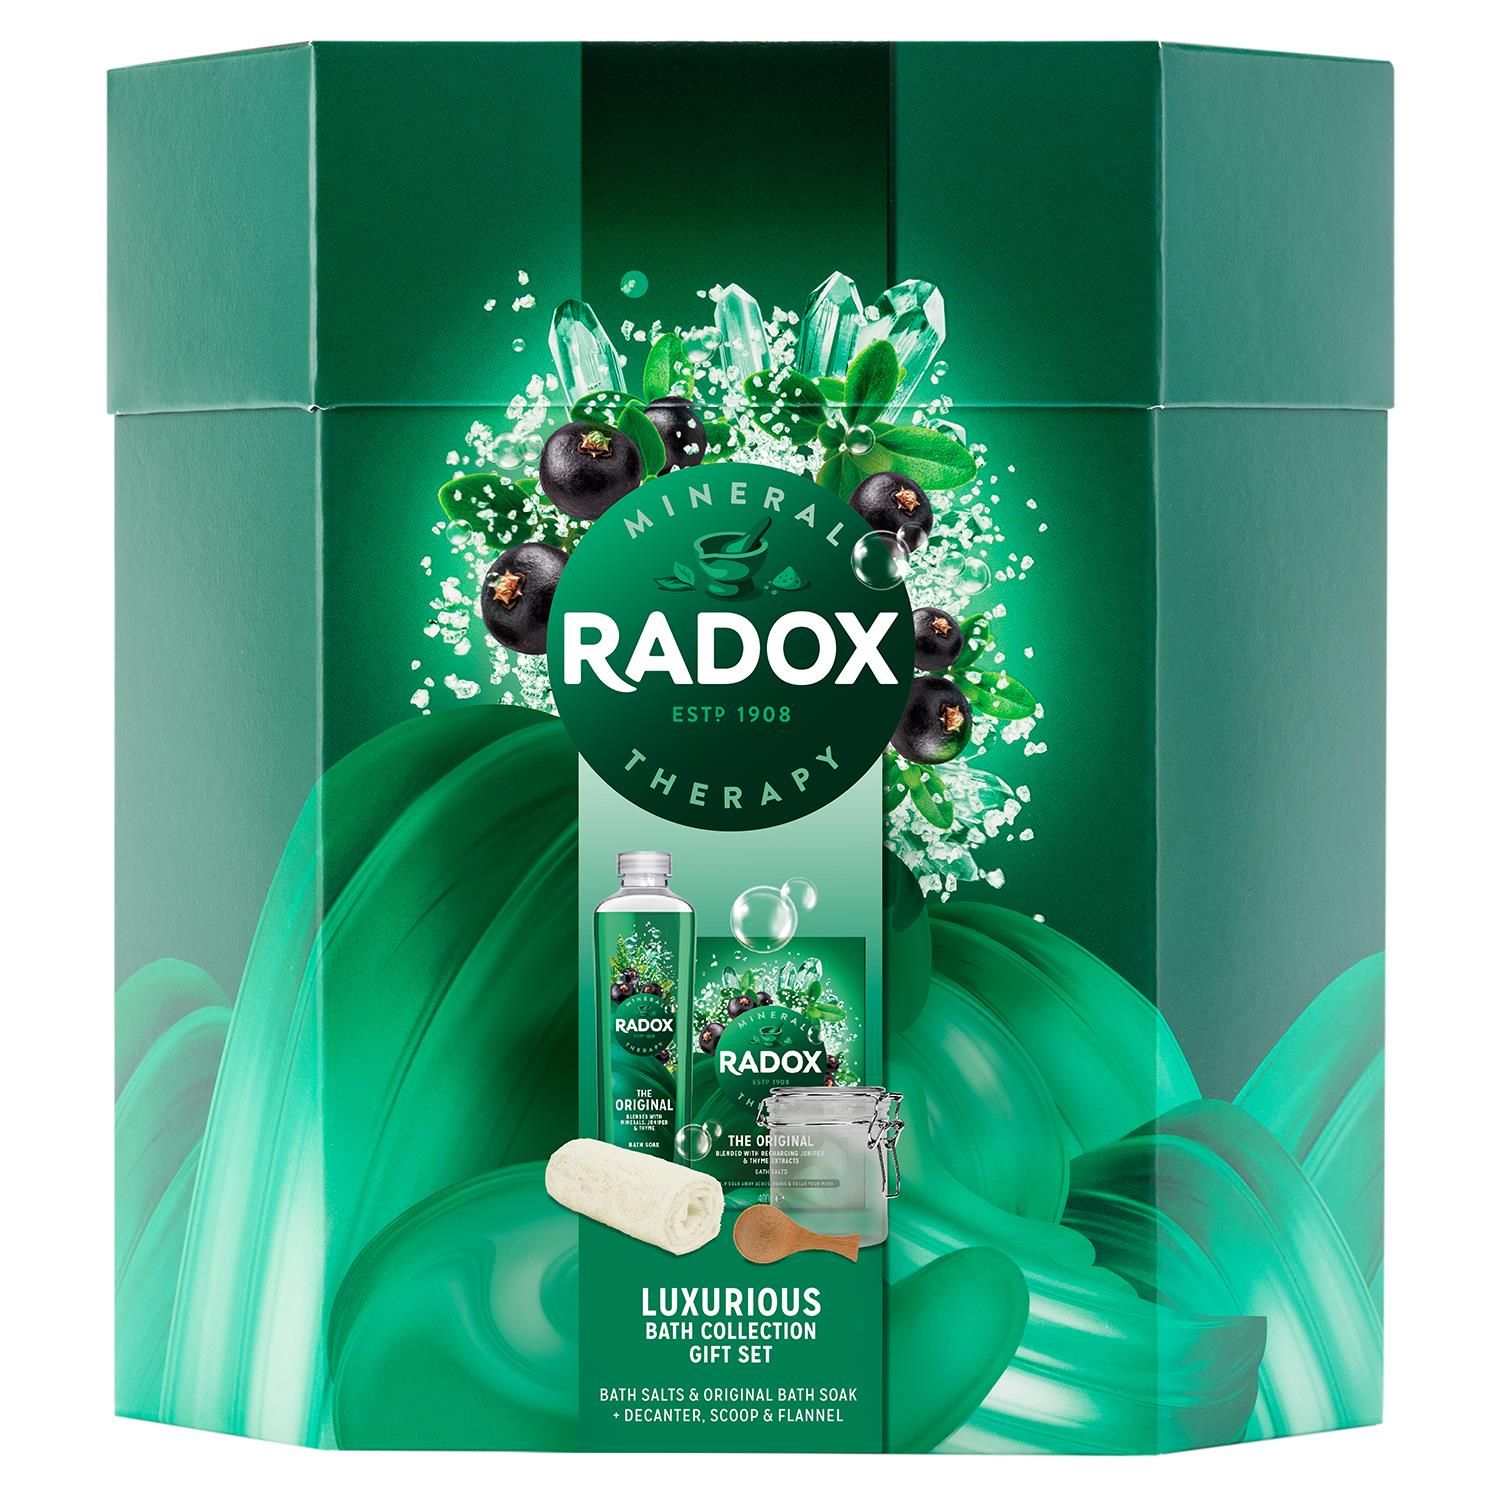 Know someone who loves to cares for their body and looking for the perfect relaxation enriched with minerals and herbs extracts here is the perfect gift introduced by Radox that comes with the complete Radox Luxurious Bath Collection Gift Set. When your body’s trying to tell you something. Time to listen. Time to swap press-ups and lunging for lounging. Don’t float like a butterfly, sink like a stone into a warm juniper and thyme-scented bath for some well-deserved me-time. From troubles to bubbles, close your eyes, relax and recover. 

Enjoy the soothing blend of minerals, juniper, and thyme with Radox The Original Bath Soak. From troubles to bubbles, close your eyes and let the replenishing bath soak cleanse your body, and revive you. Radox Mineral Therapy The Original Bath Salts are crafted with 100% pure sea salt with natural calcium, sodium, and magnesium, the perfect blend to help you unwind in a relaxing bath. 

This is the perfect gift set that introduces your caring nature towards your loved ones as it also comes with a decanter, scoop & flannel so that there are no more things to look for. This Christmas enlightens by presenting this gift set to the one who matters to you the most!

Features:
Radox Mineral Therapy The Original Bath Salts are enriched with calcium, sodium and magnesium and are pH neutral, meaning they are suitable for all skin types.
Inspired by nature’s best ingredients, our premium bath salts are blended with the recharging extracts of juniper & thyme.
Enjoy the soothing blend of minerals, juniper and thyme with Radox The Original Bath Soak

Safety Warnings: Avoid contact with eyes. If eye contact occurs, rinse well with water. If rash or irritation occurs, discontinue use.

Gift Set Includes:

1x Radox The Original Bath Soak 500 ml,
1x Radox The Original Bath Salts 400 g,
1x Decanter,
1x Scoop,
1x Flannel